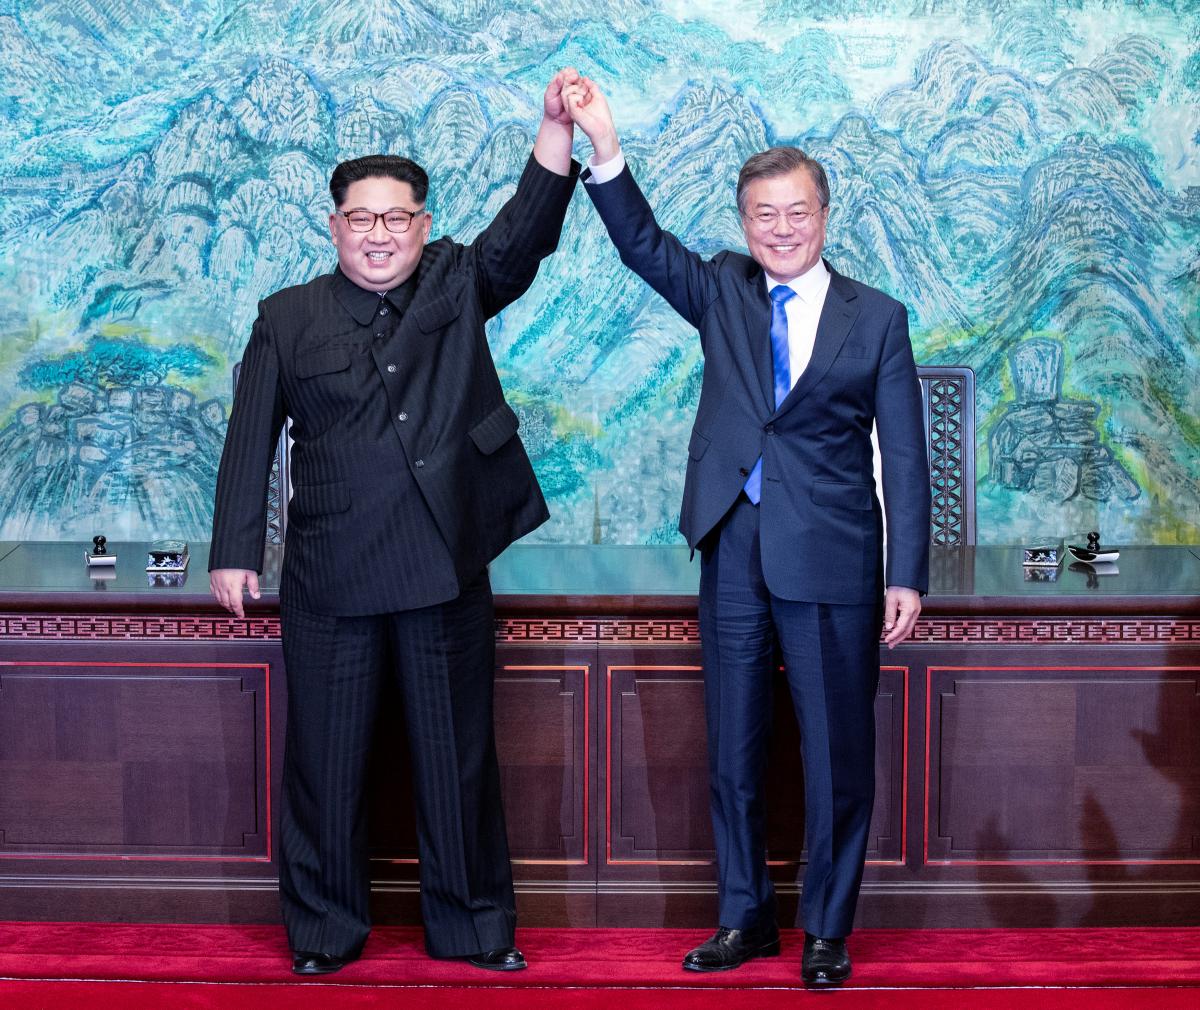 ​Korean leaders aim for end of war, 'complete denuclearization' after historic summit